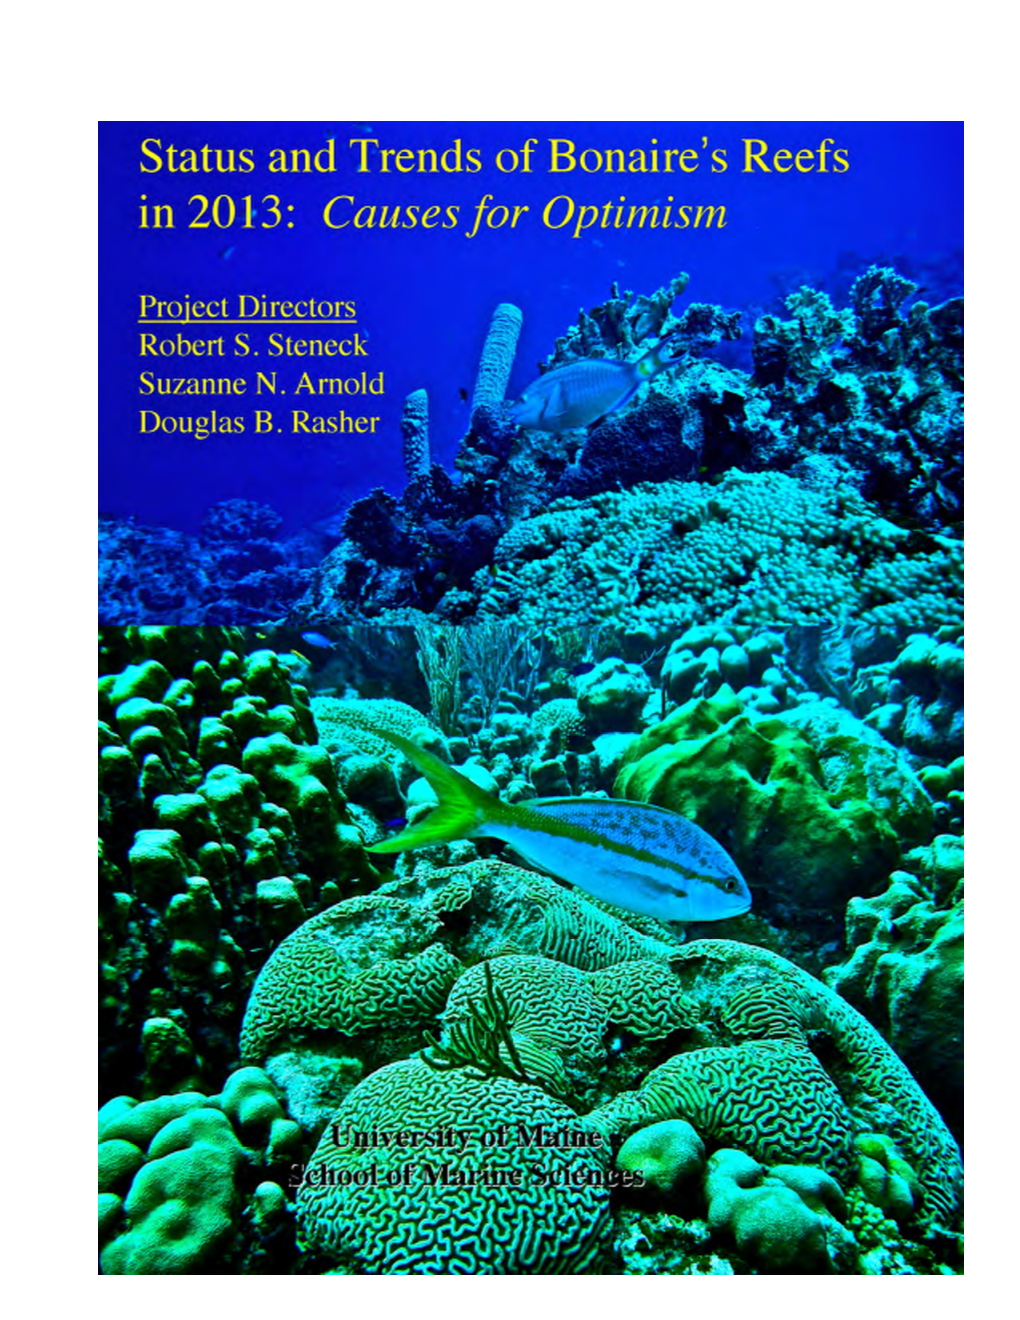 Status and Trends of Bonaire's Reefs in 2013